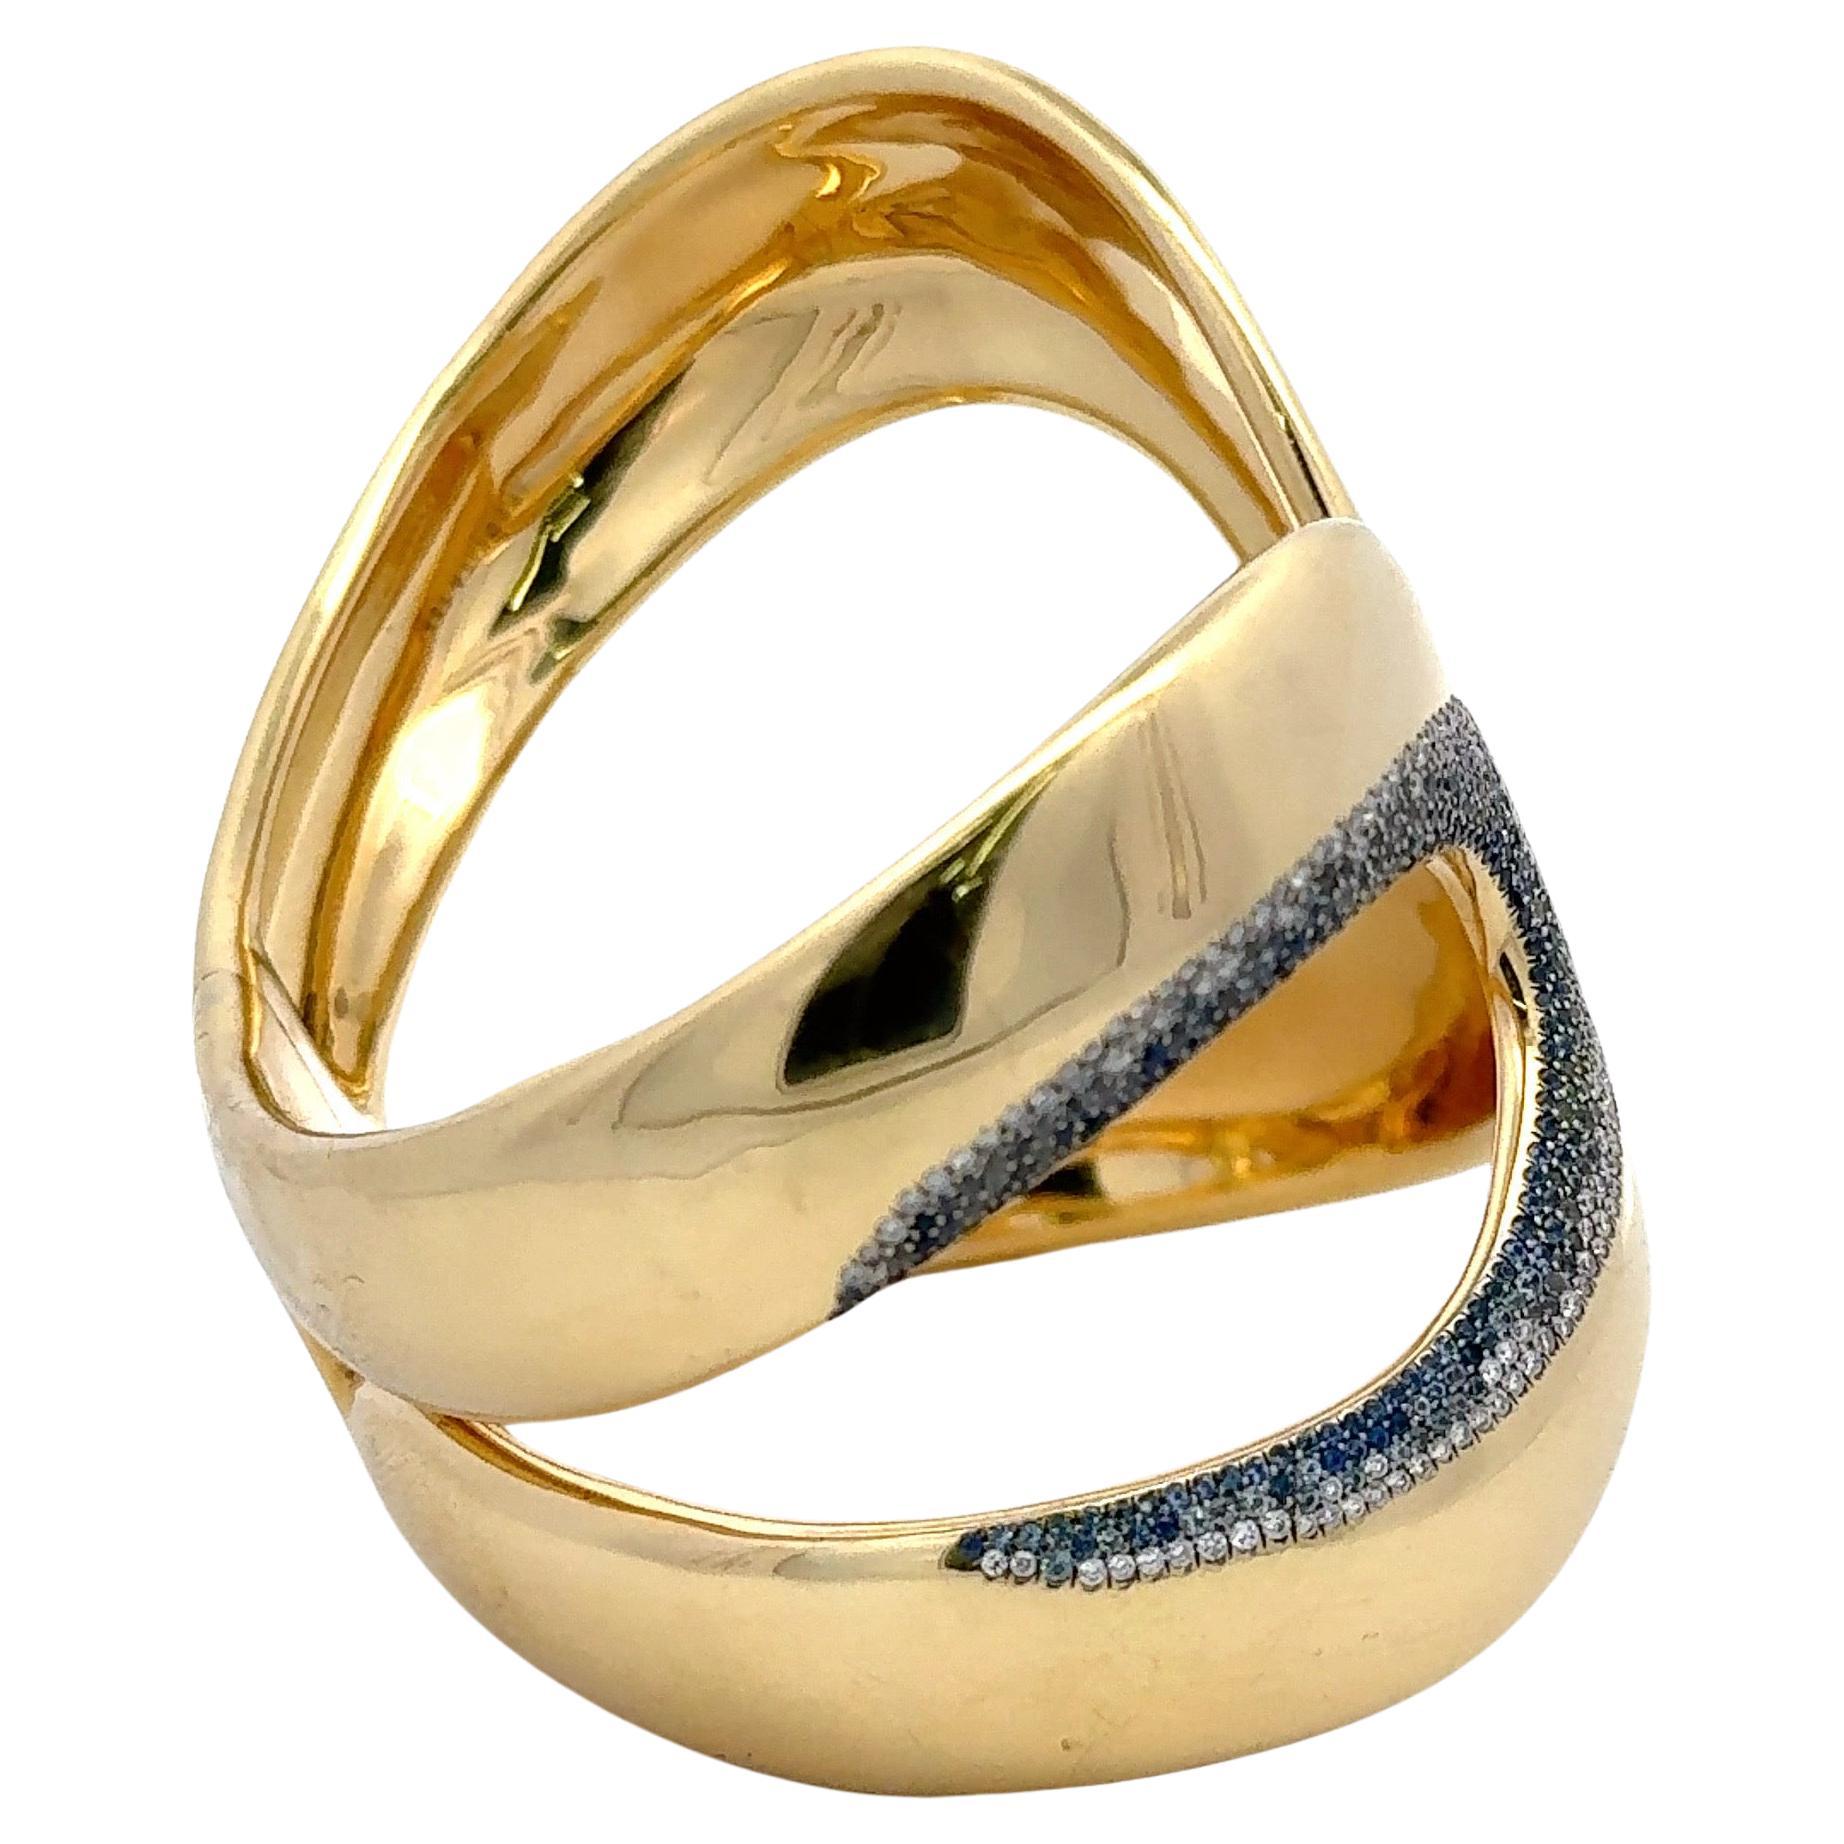 Signed Ippolita, this 18 karat yellow gold wide bangle features a stardust of round brilliants and Sapphires weighing 1.51 grams. 
Approximately 5 Carats of Diamonds
Made in Italy
Hinged Closure
Original Price: $32,000